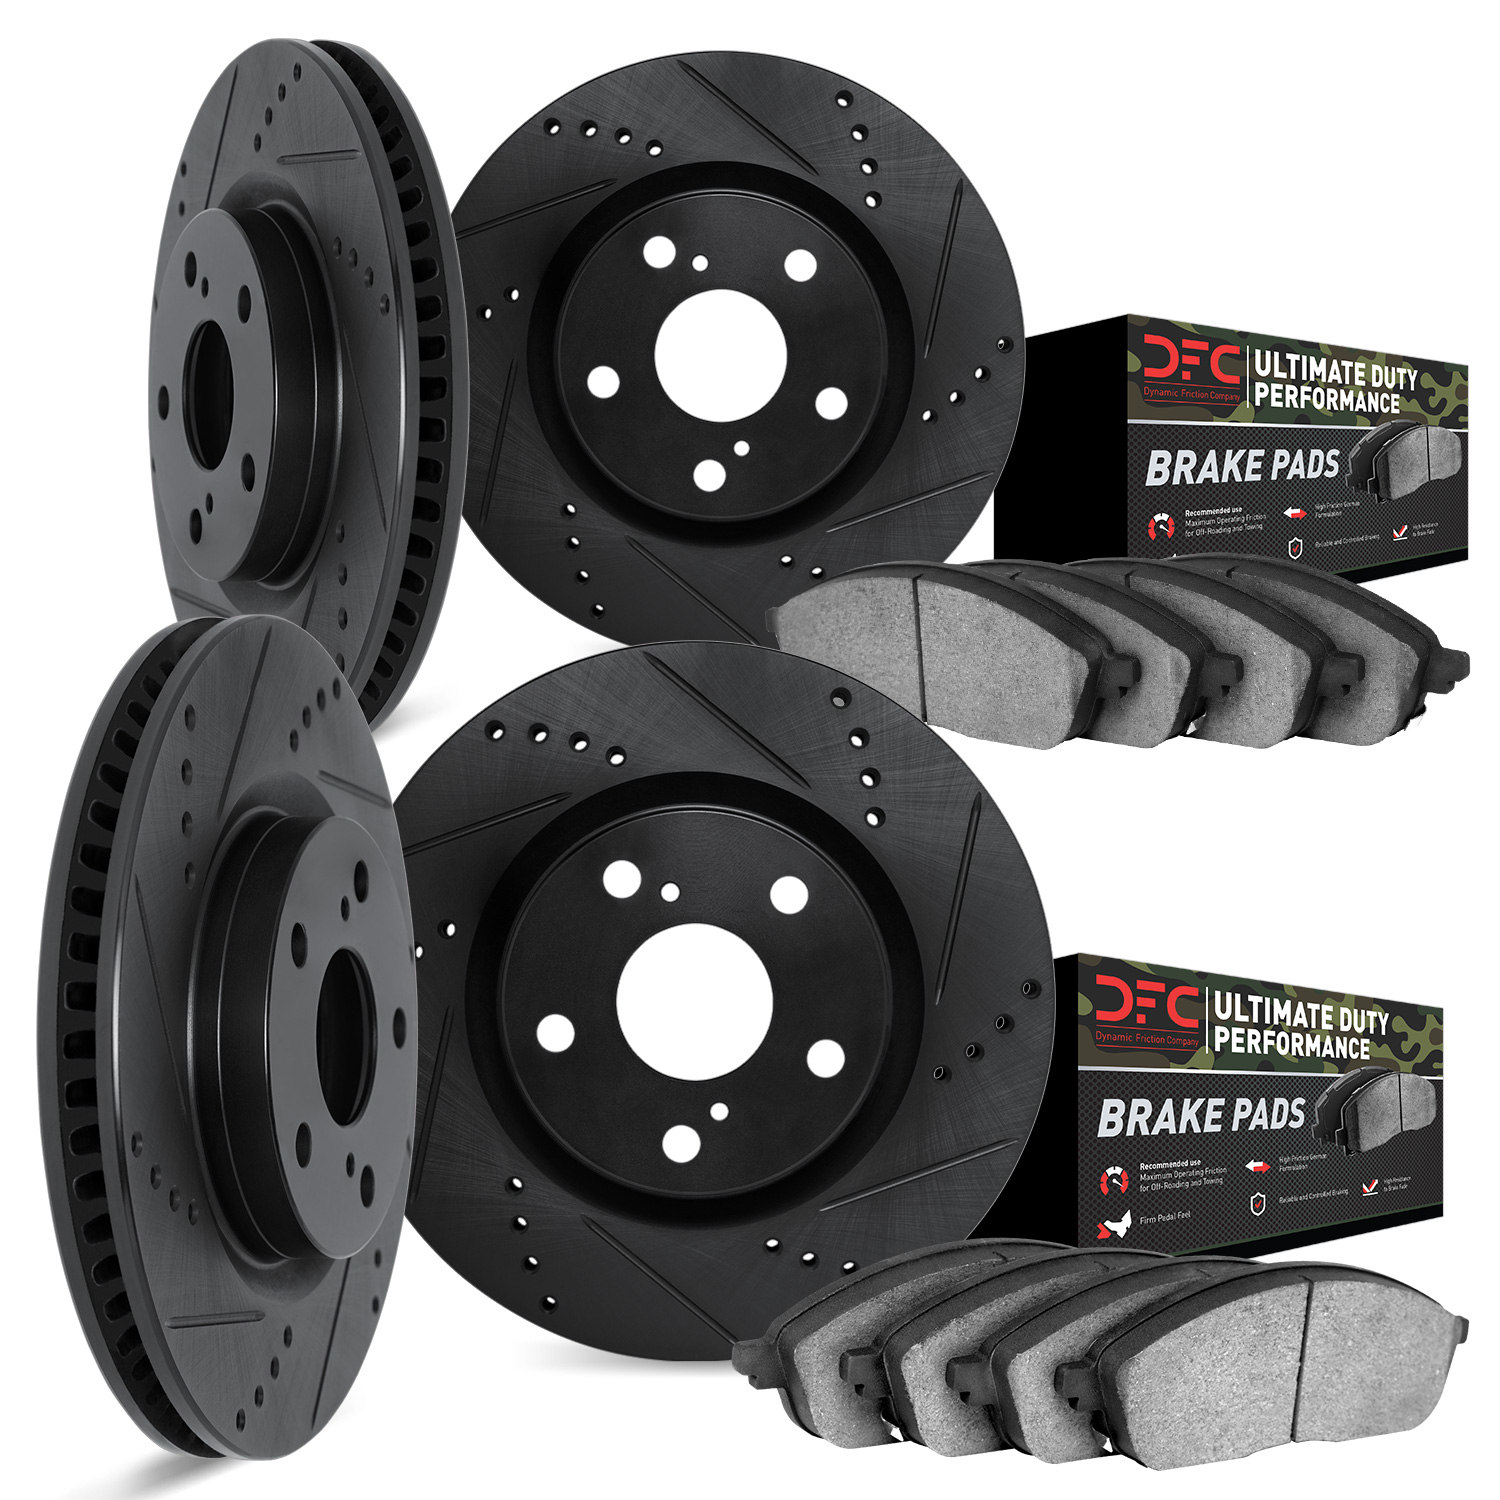 8404-76006 Drilled/Slotted Brake Rotors with Ultimate-Duty Brake Pads Kit [Black], Fits Select Lexus/Toyota/Scion, Position: Fro